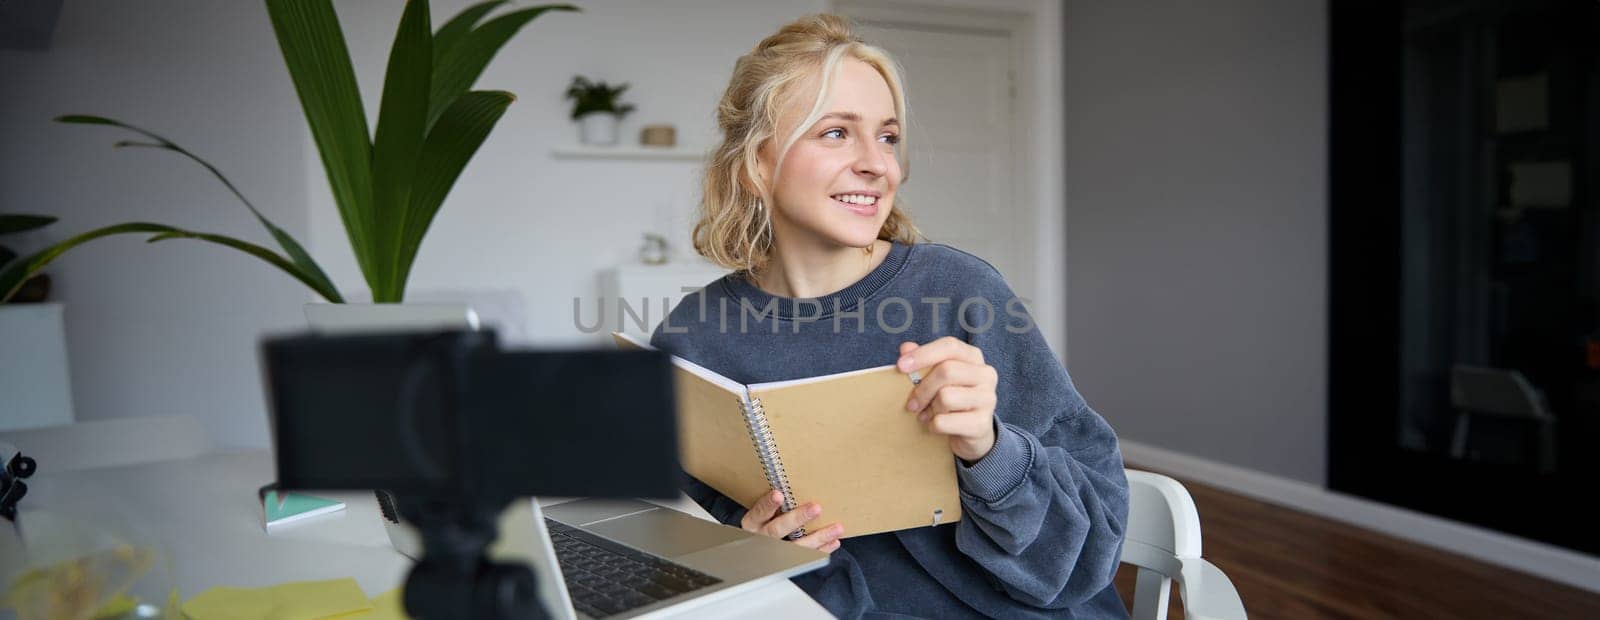 Portrait of smiling blond woman, sitting in bedroom, using laptop and digital camera, recording video for lifestyle blog, reading, using her notebook.